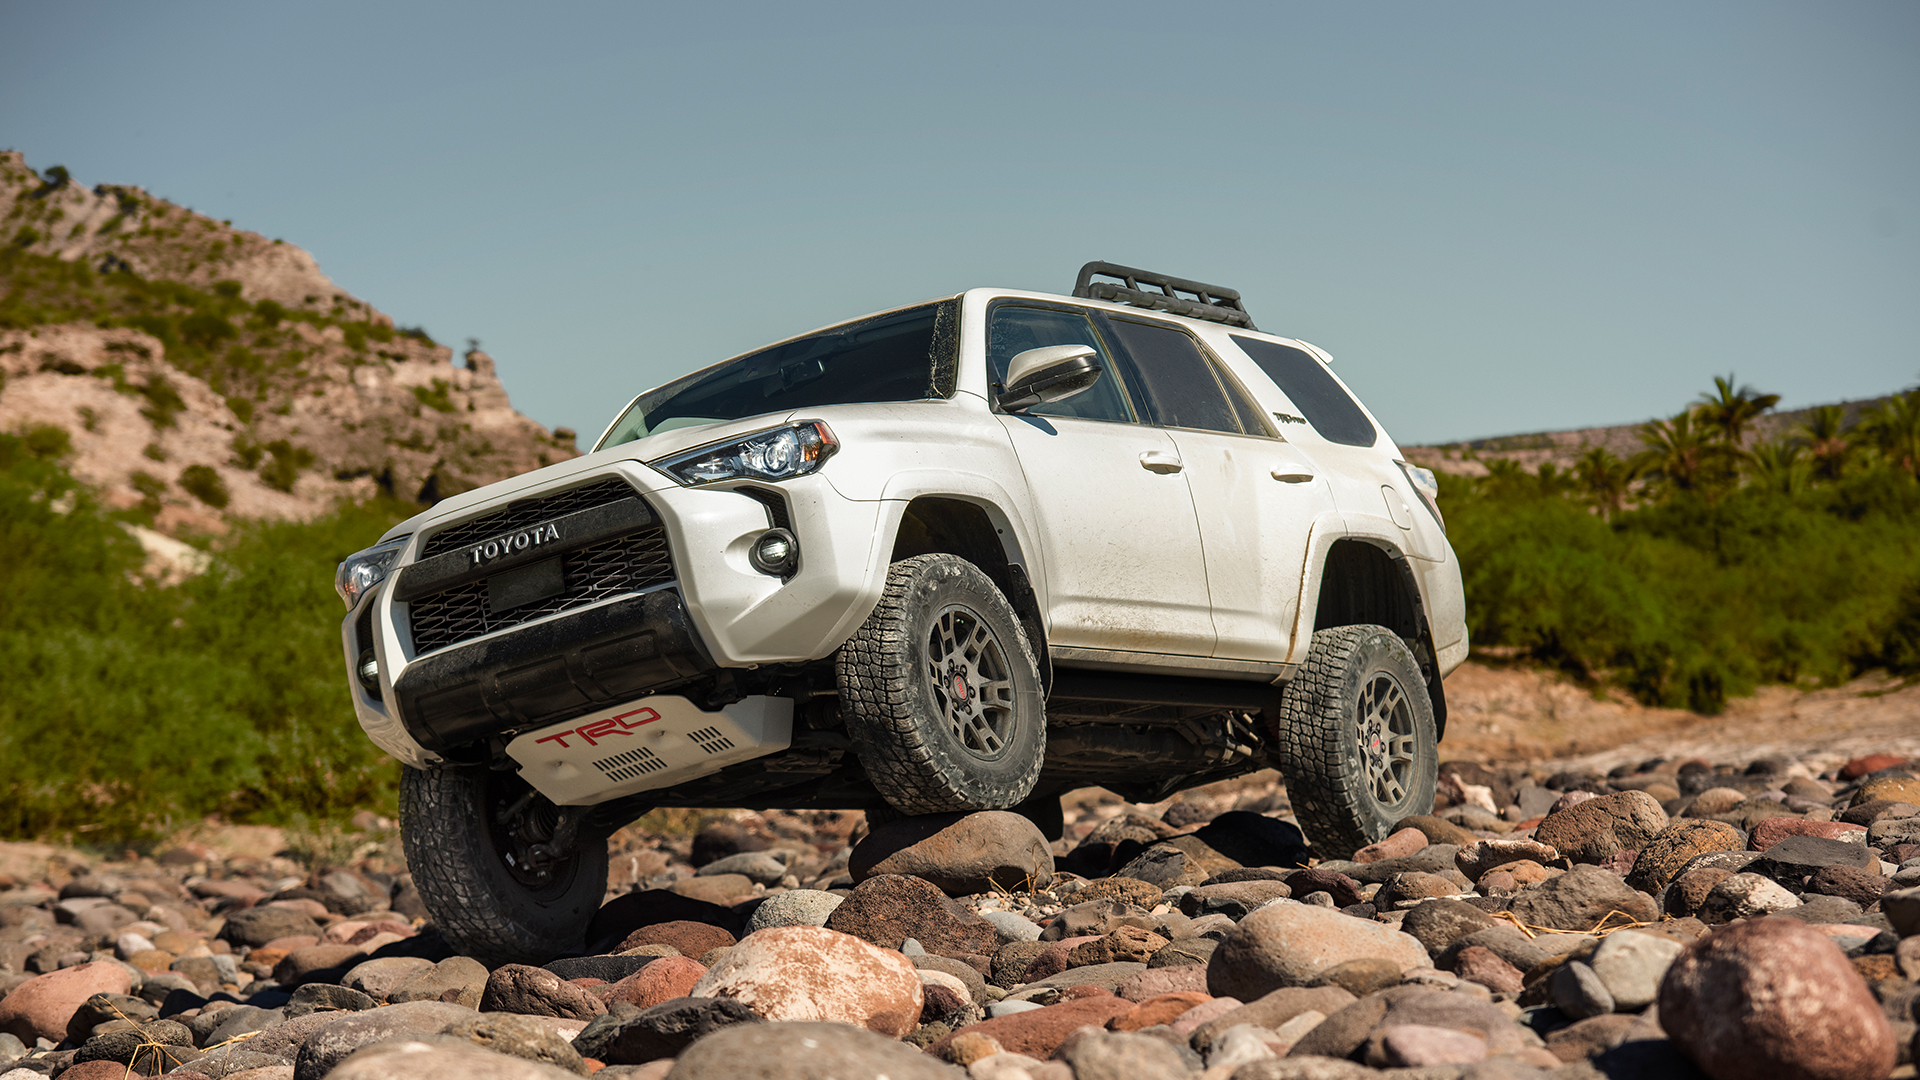 Toyota's 4Runner is a durable SUV for hunting.